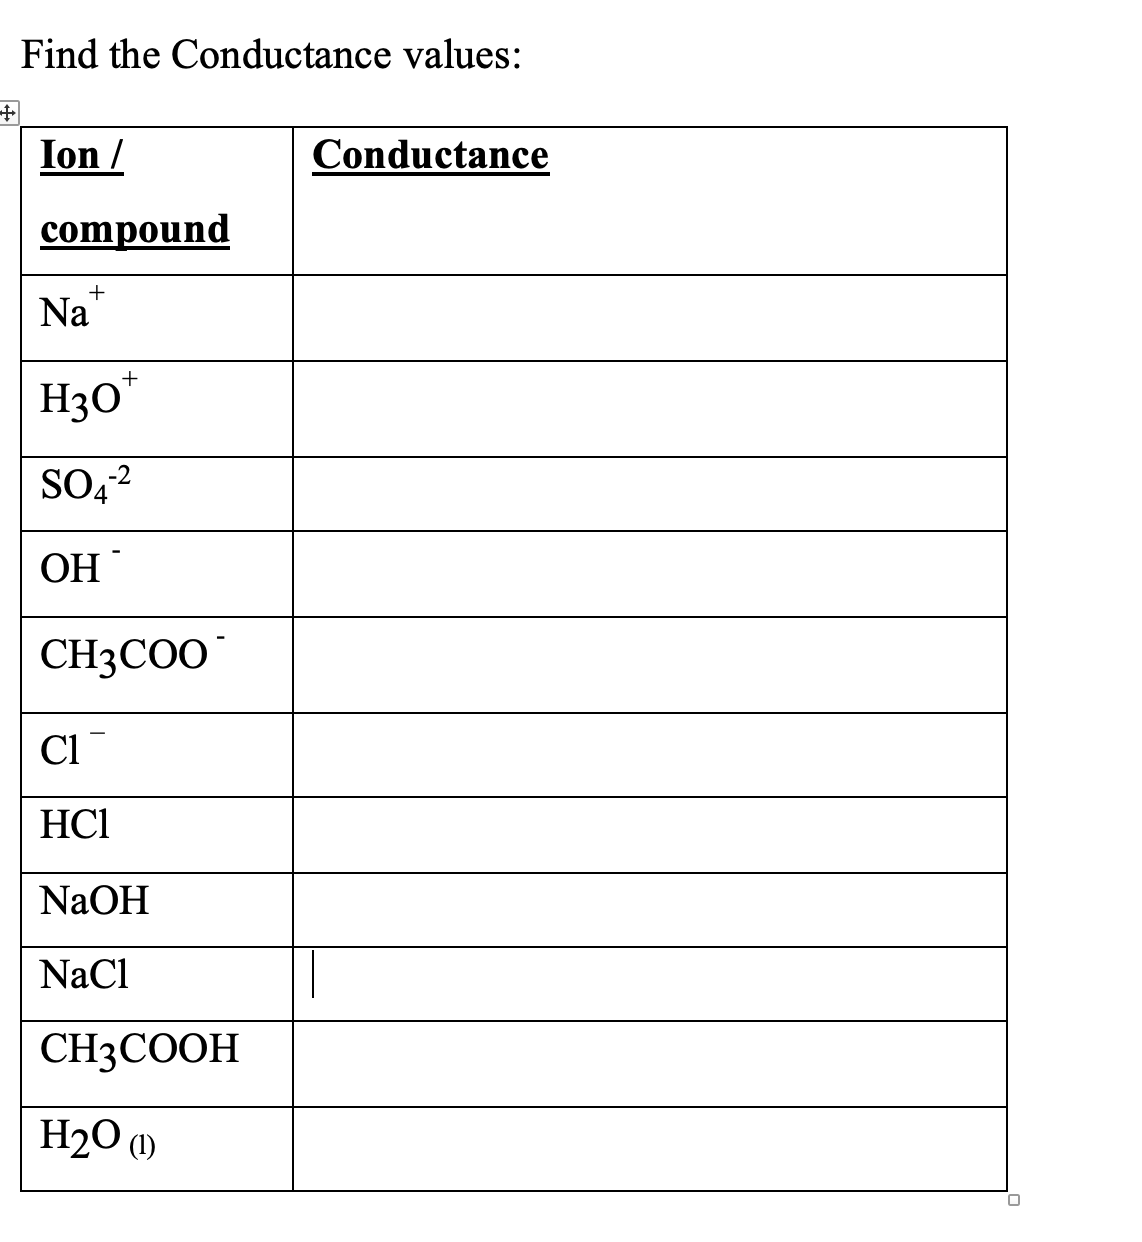 Find the Conductance values:
Ion /
compound
+
Na
+
H30
SO4-²
-2
OH
CH3COO
Cl
HC1
NaOH
NaCl
CH3COOH
H₂O (1)
Conductance